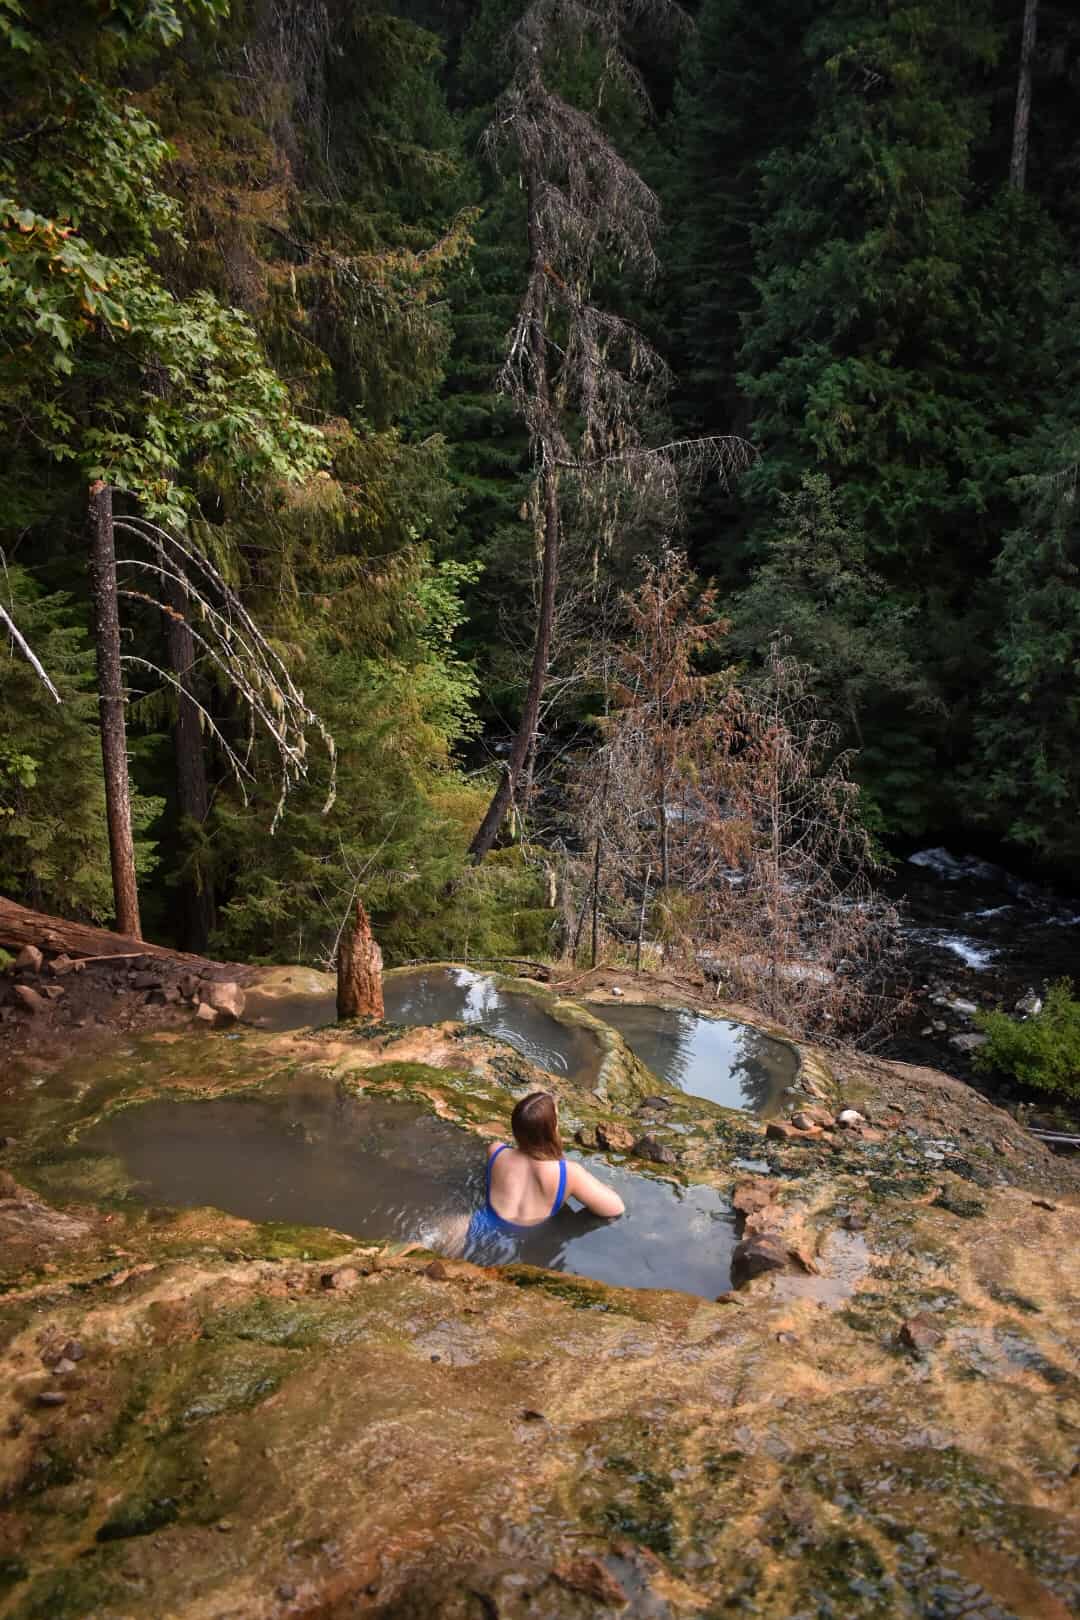 Woman wearing a blue bathing suit sits in a hot spring. It is the top of 3 travertine style hot springs in a forest with a river rushing below.